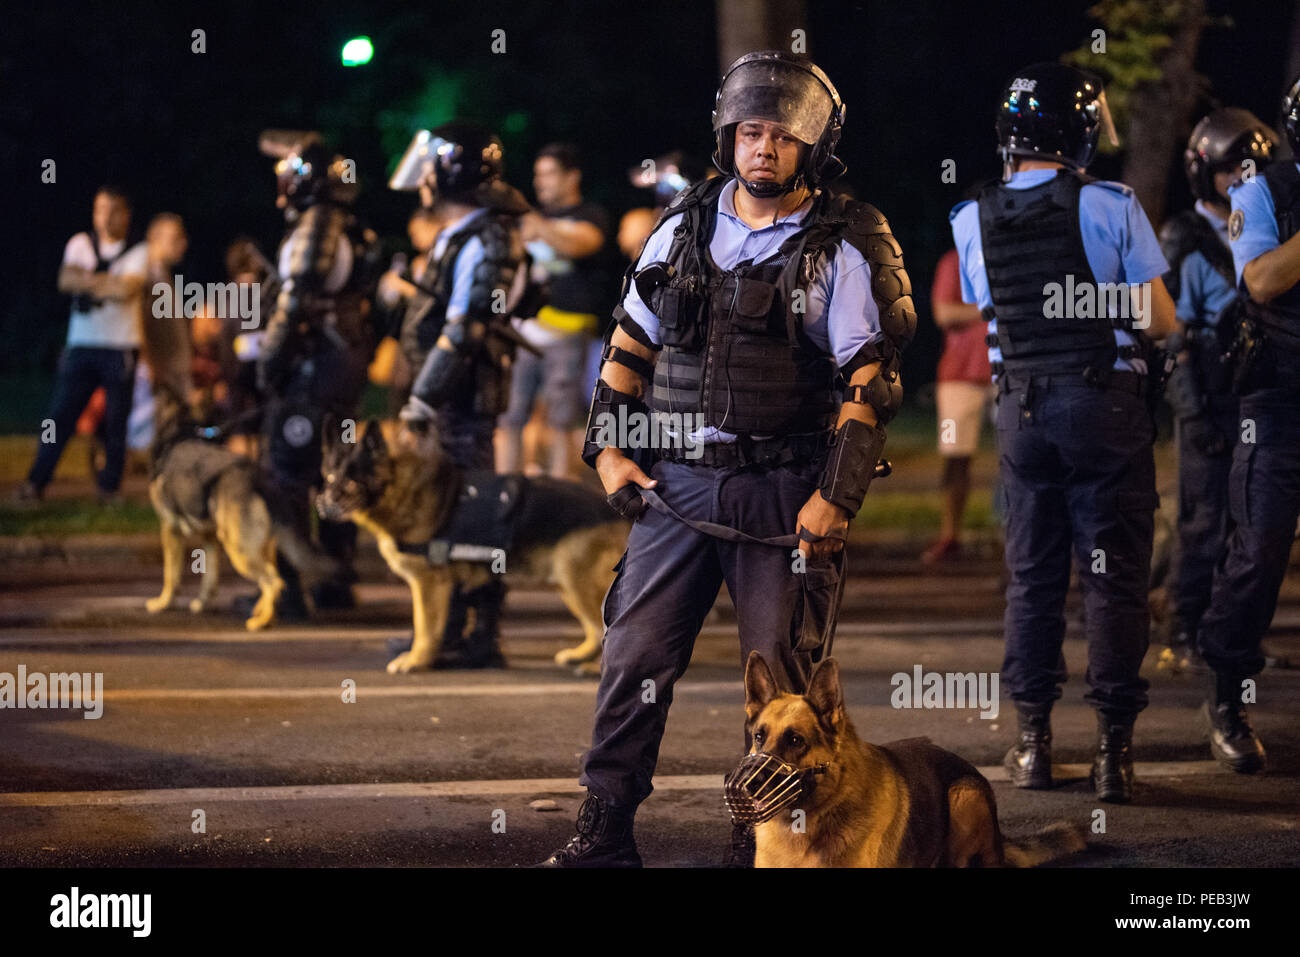 Romania, Bucharest - August 10, 2018: Police officers with trained dogs Stock Photo